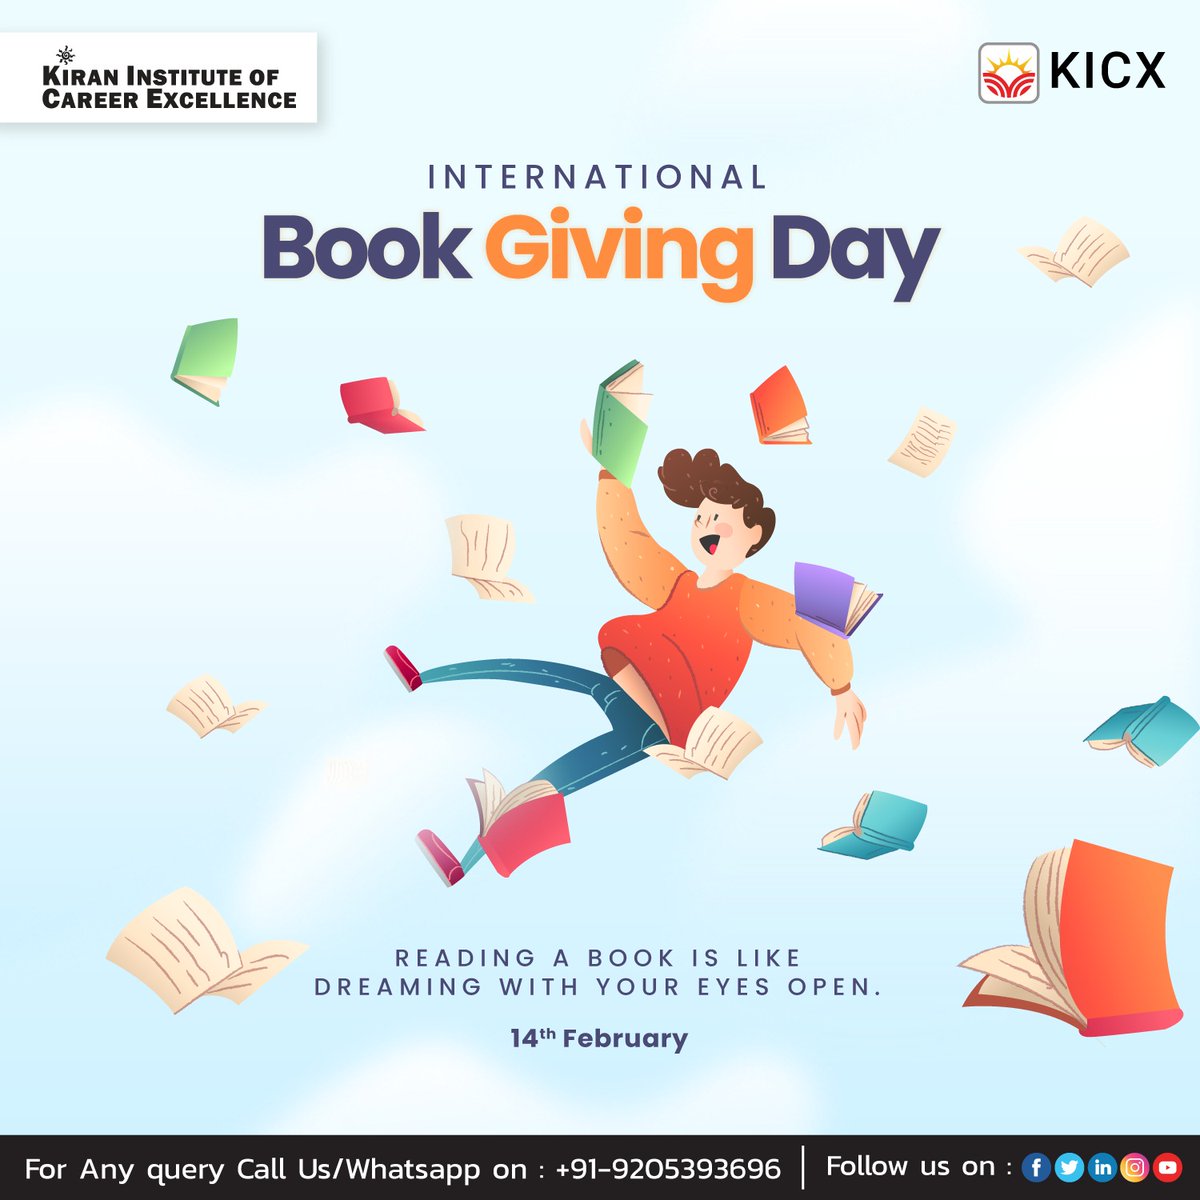 'Give the gift of imagination and knowledge this Book Giving Day.'

@kicx002 
#kicx #BookGivingDay #GiveABook #SpreadTheLoveOfReading #BookLoversUnite #BooksMakeGreatGifts #GiftOfKnowledge #ReadMoreBooks #ShareAStory #LiteracyMatters #BookwormsUnite #BookNerdsUnite